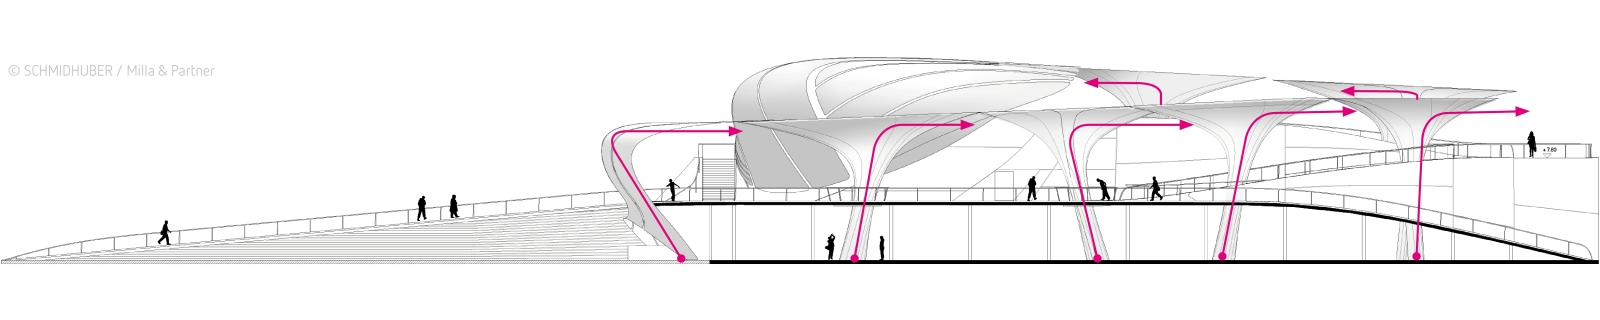 German Pavilion for Expo Milano 2015